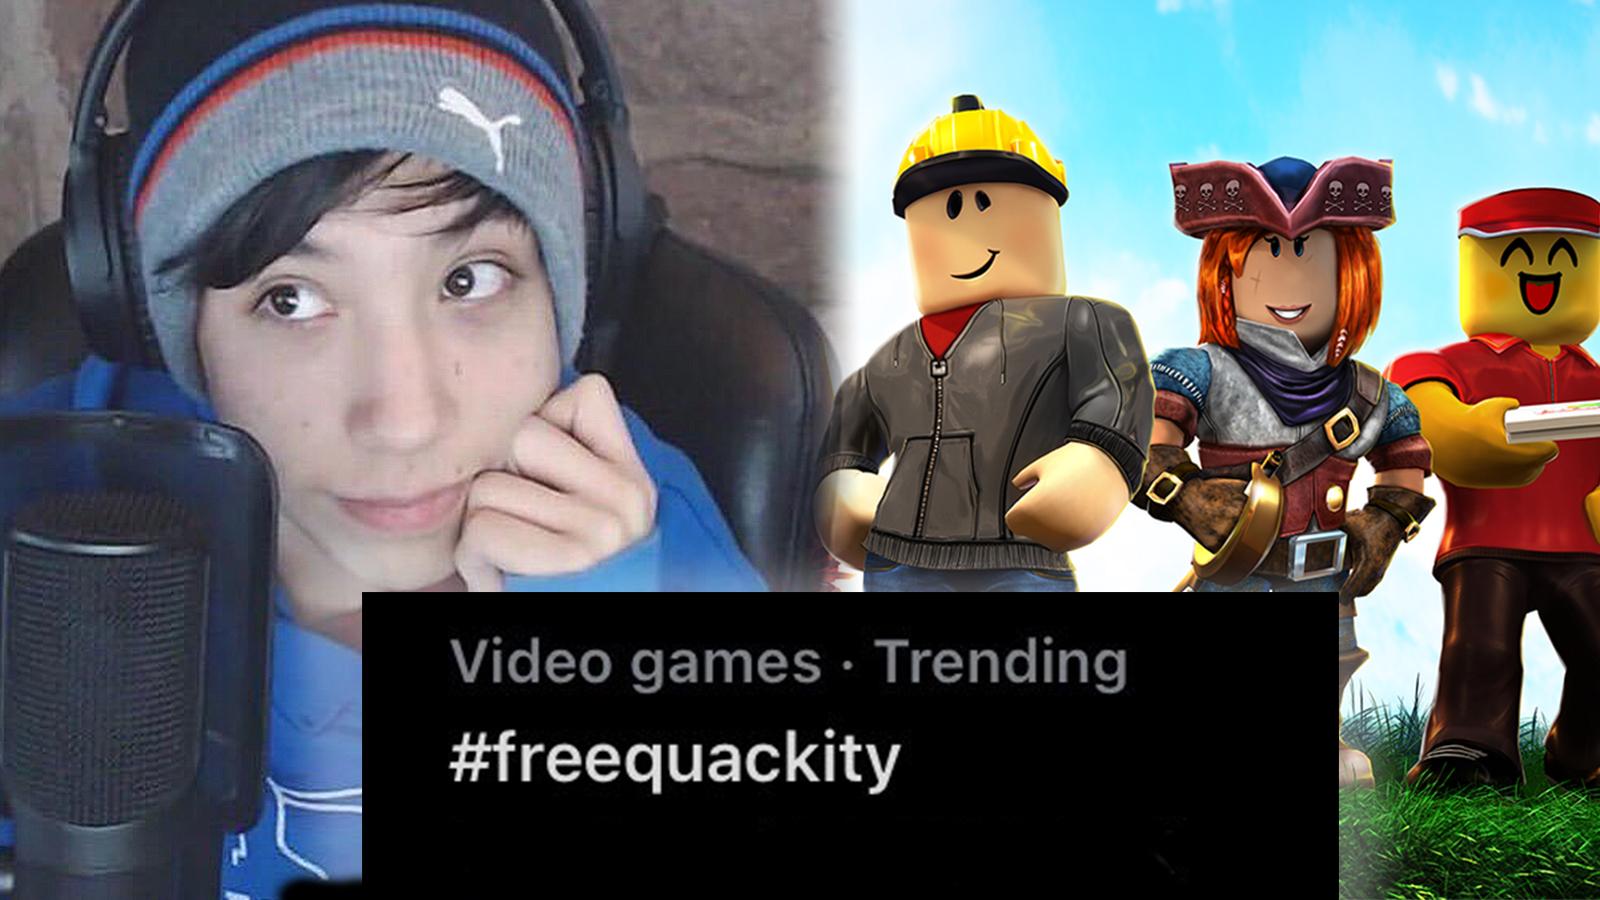 FreeQuackity trends on Twitter after Roblox bans popular streamer